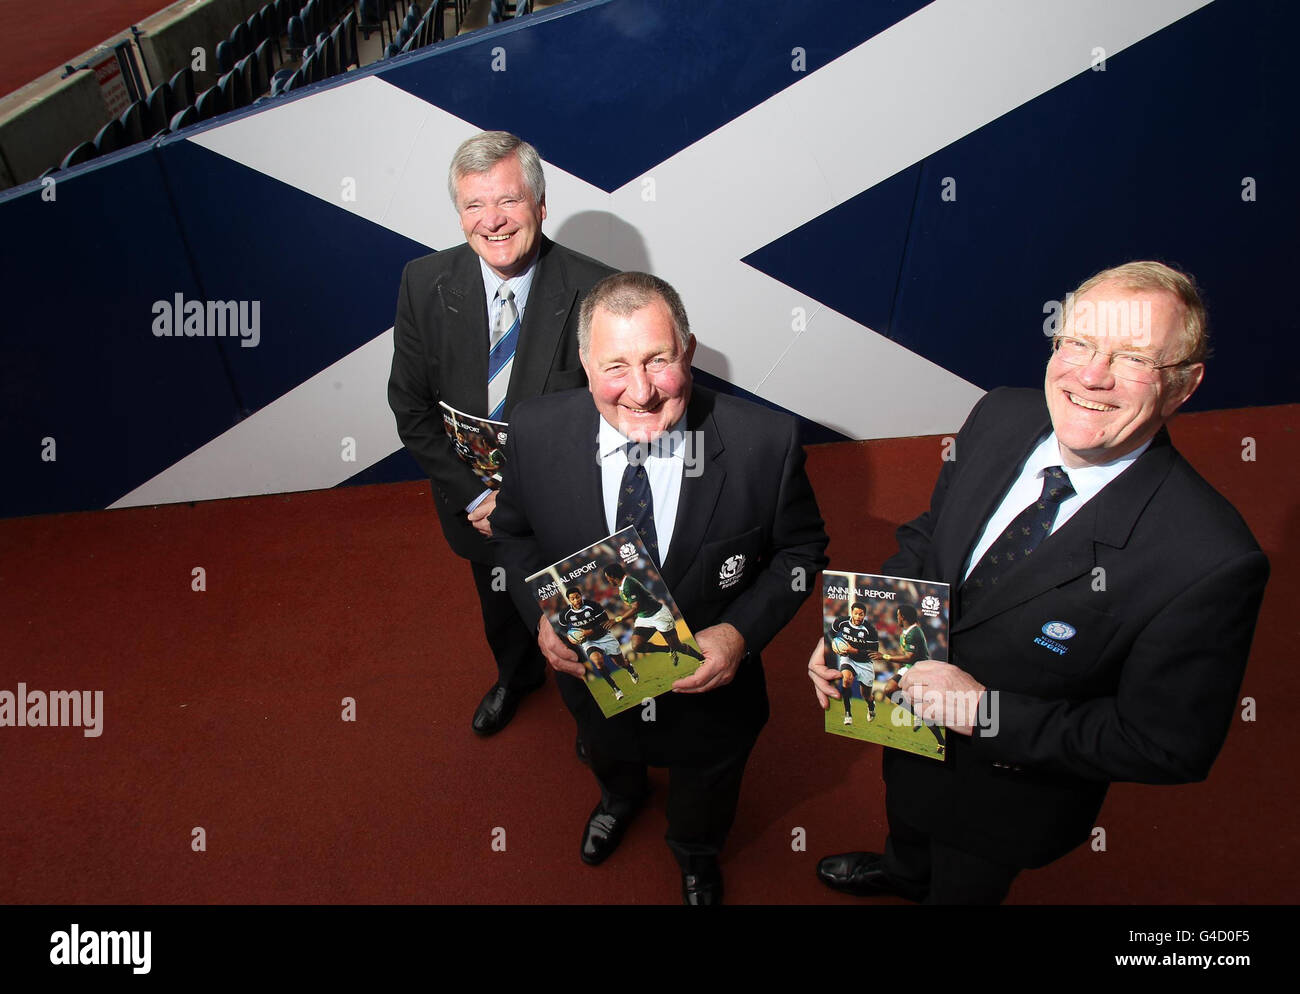 Scottish Rugby Union members Allan Munro (Chairman), Ian McLauchan (president) and Jock Millican (Non-Executive Director and Chief Executive) during the Scottish Rugby Union AGM at Murrayfield, Edinburgh. Stock Photo